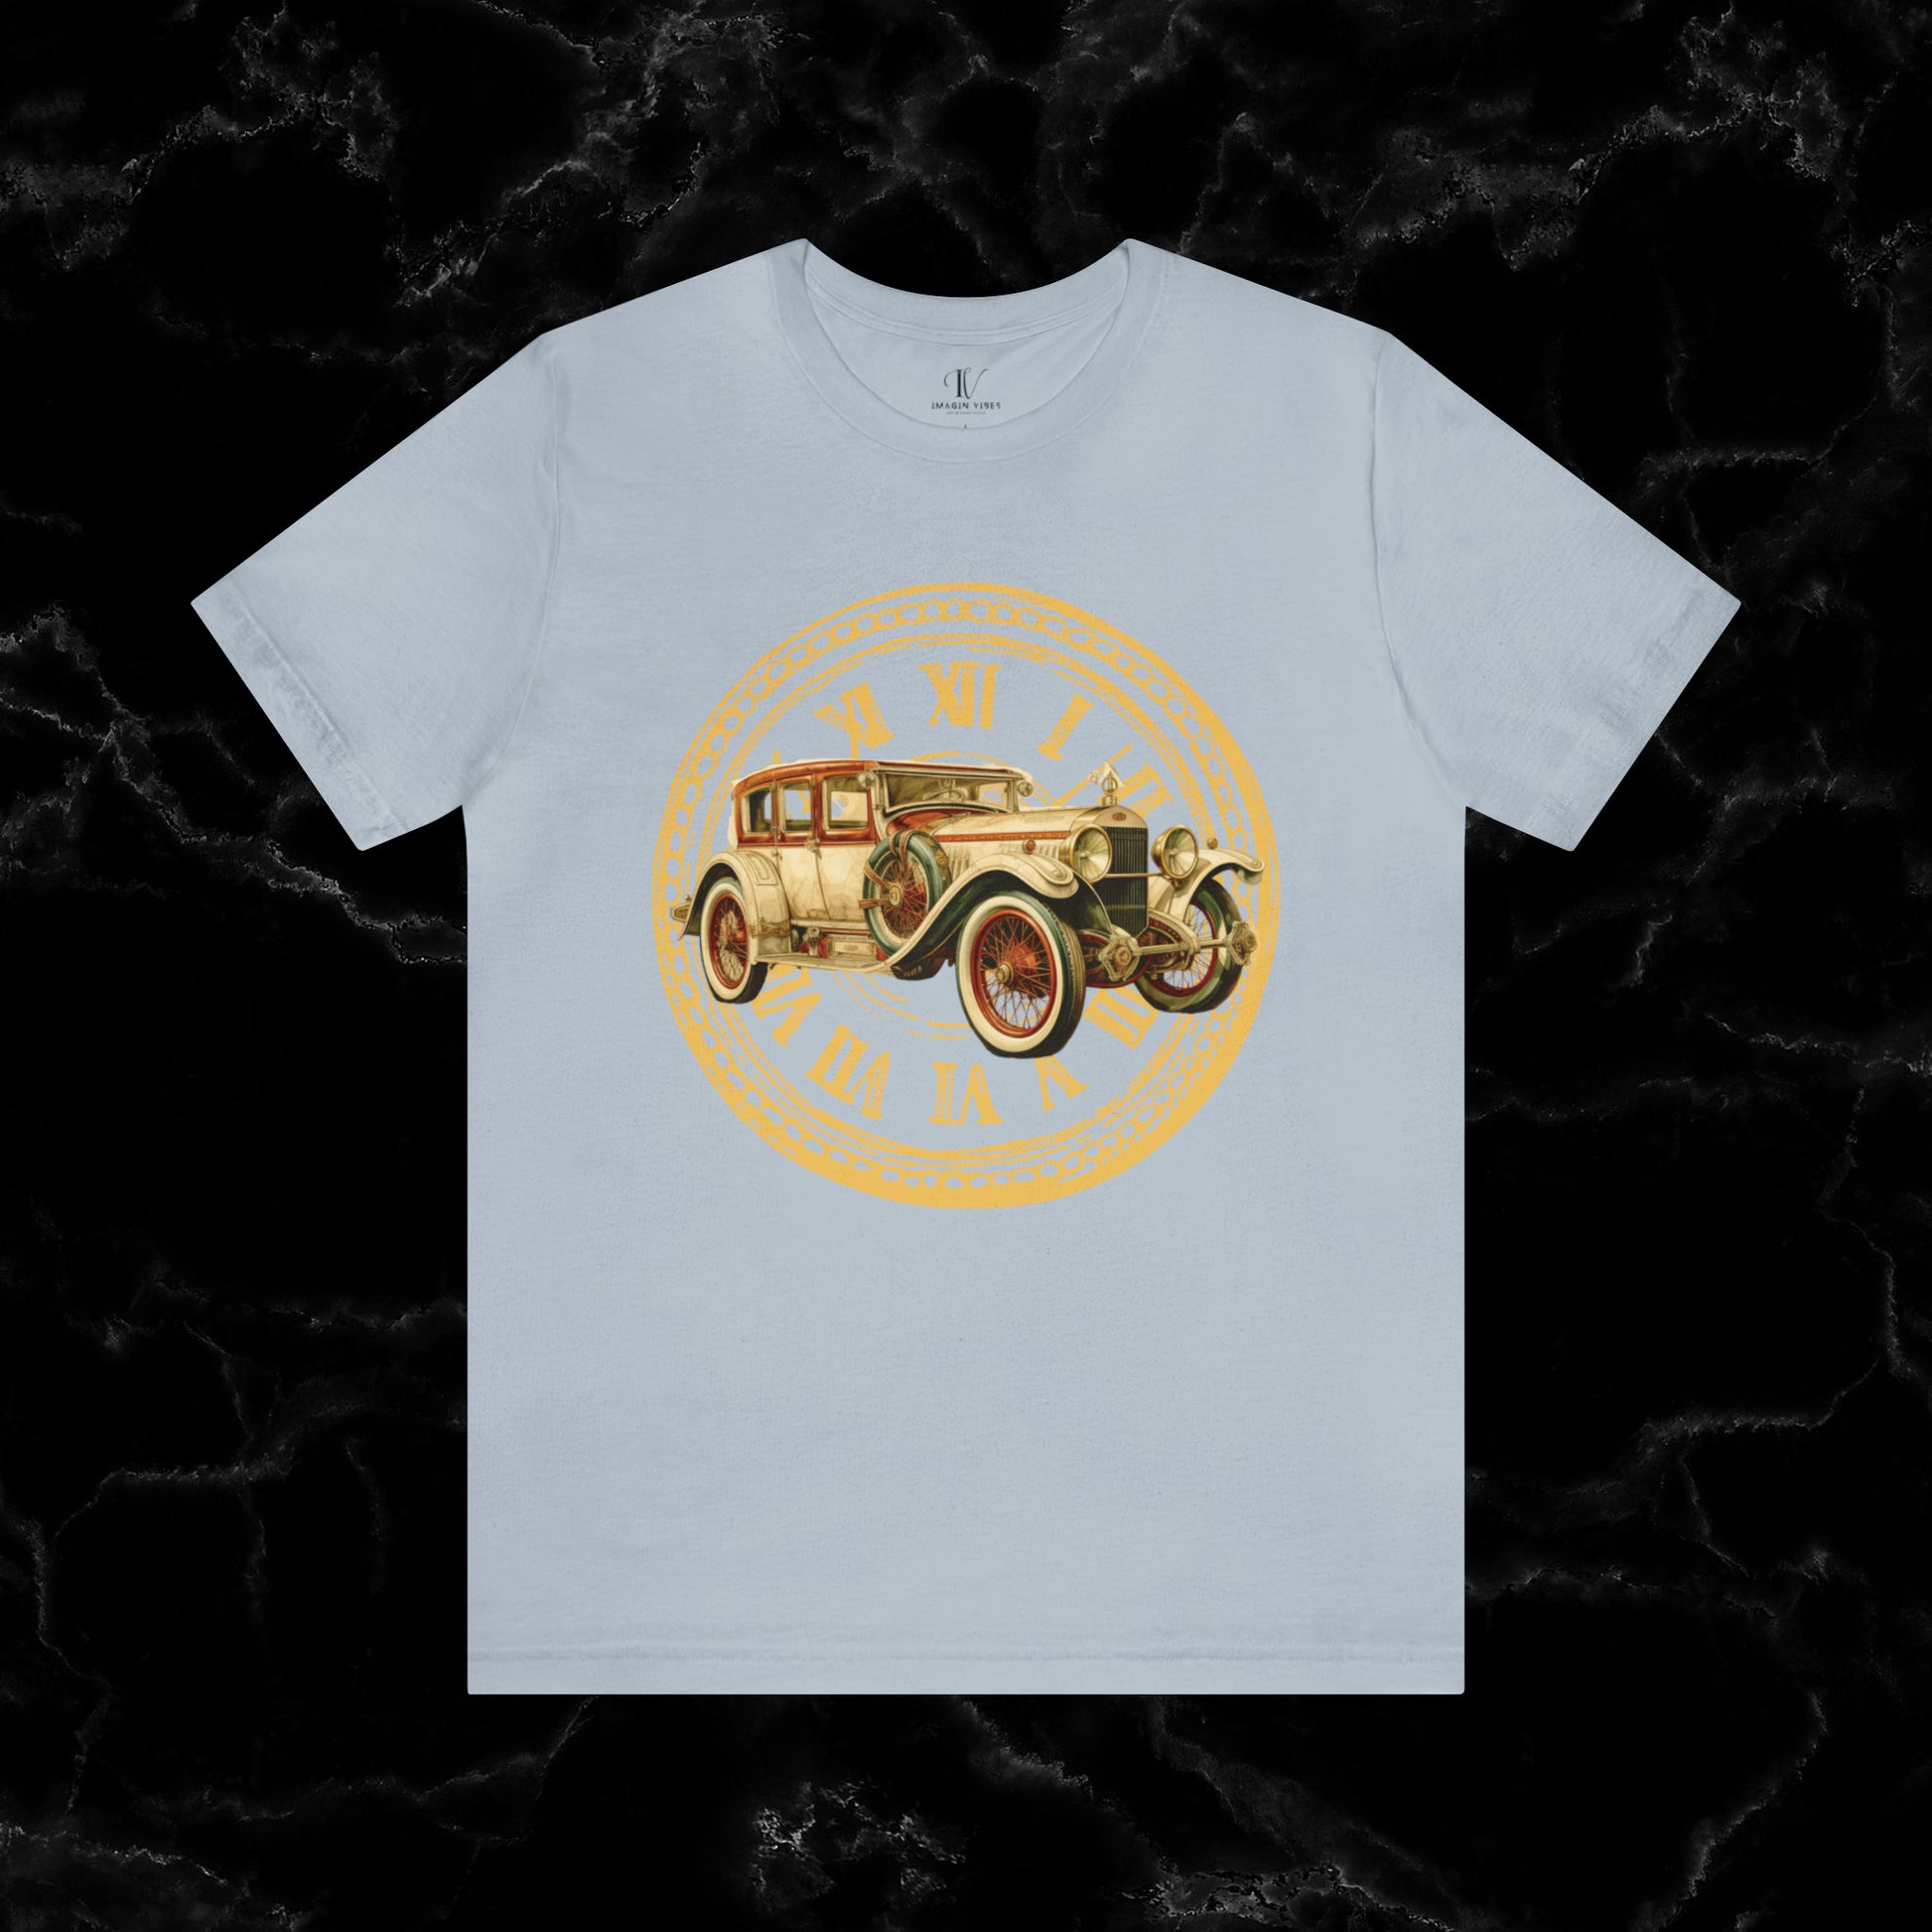 Vintage Car Enthusiast T-Shirt with Classic Wheels and Timeless Appeal T-Shirt Light Blue S 